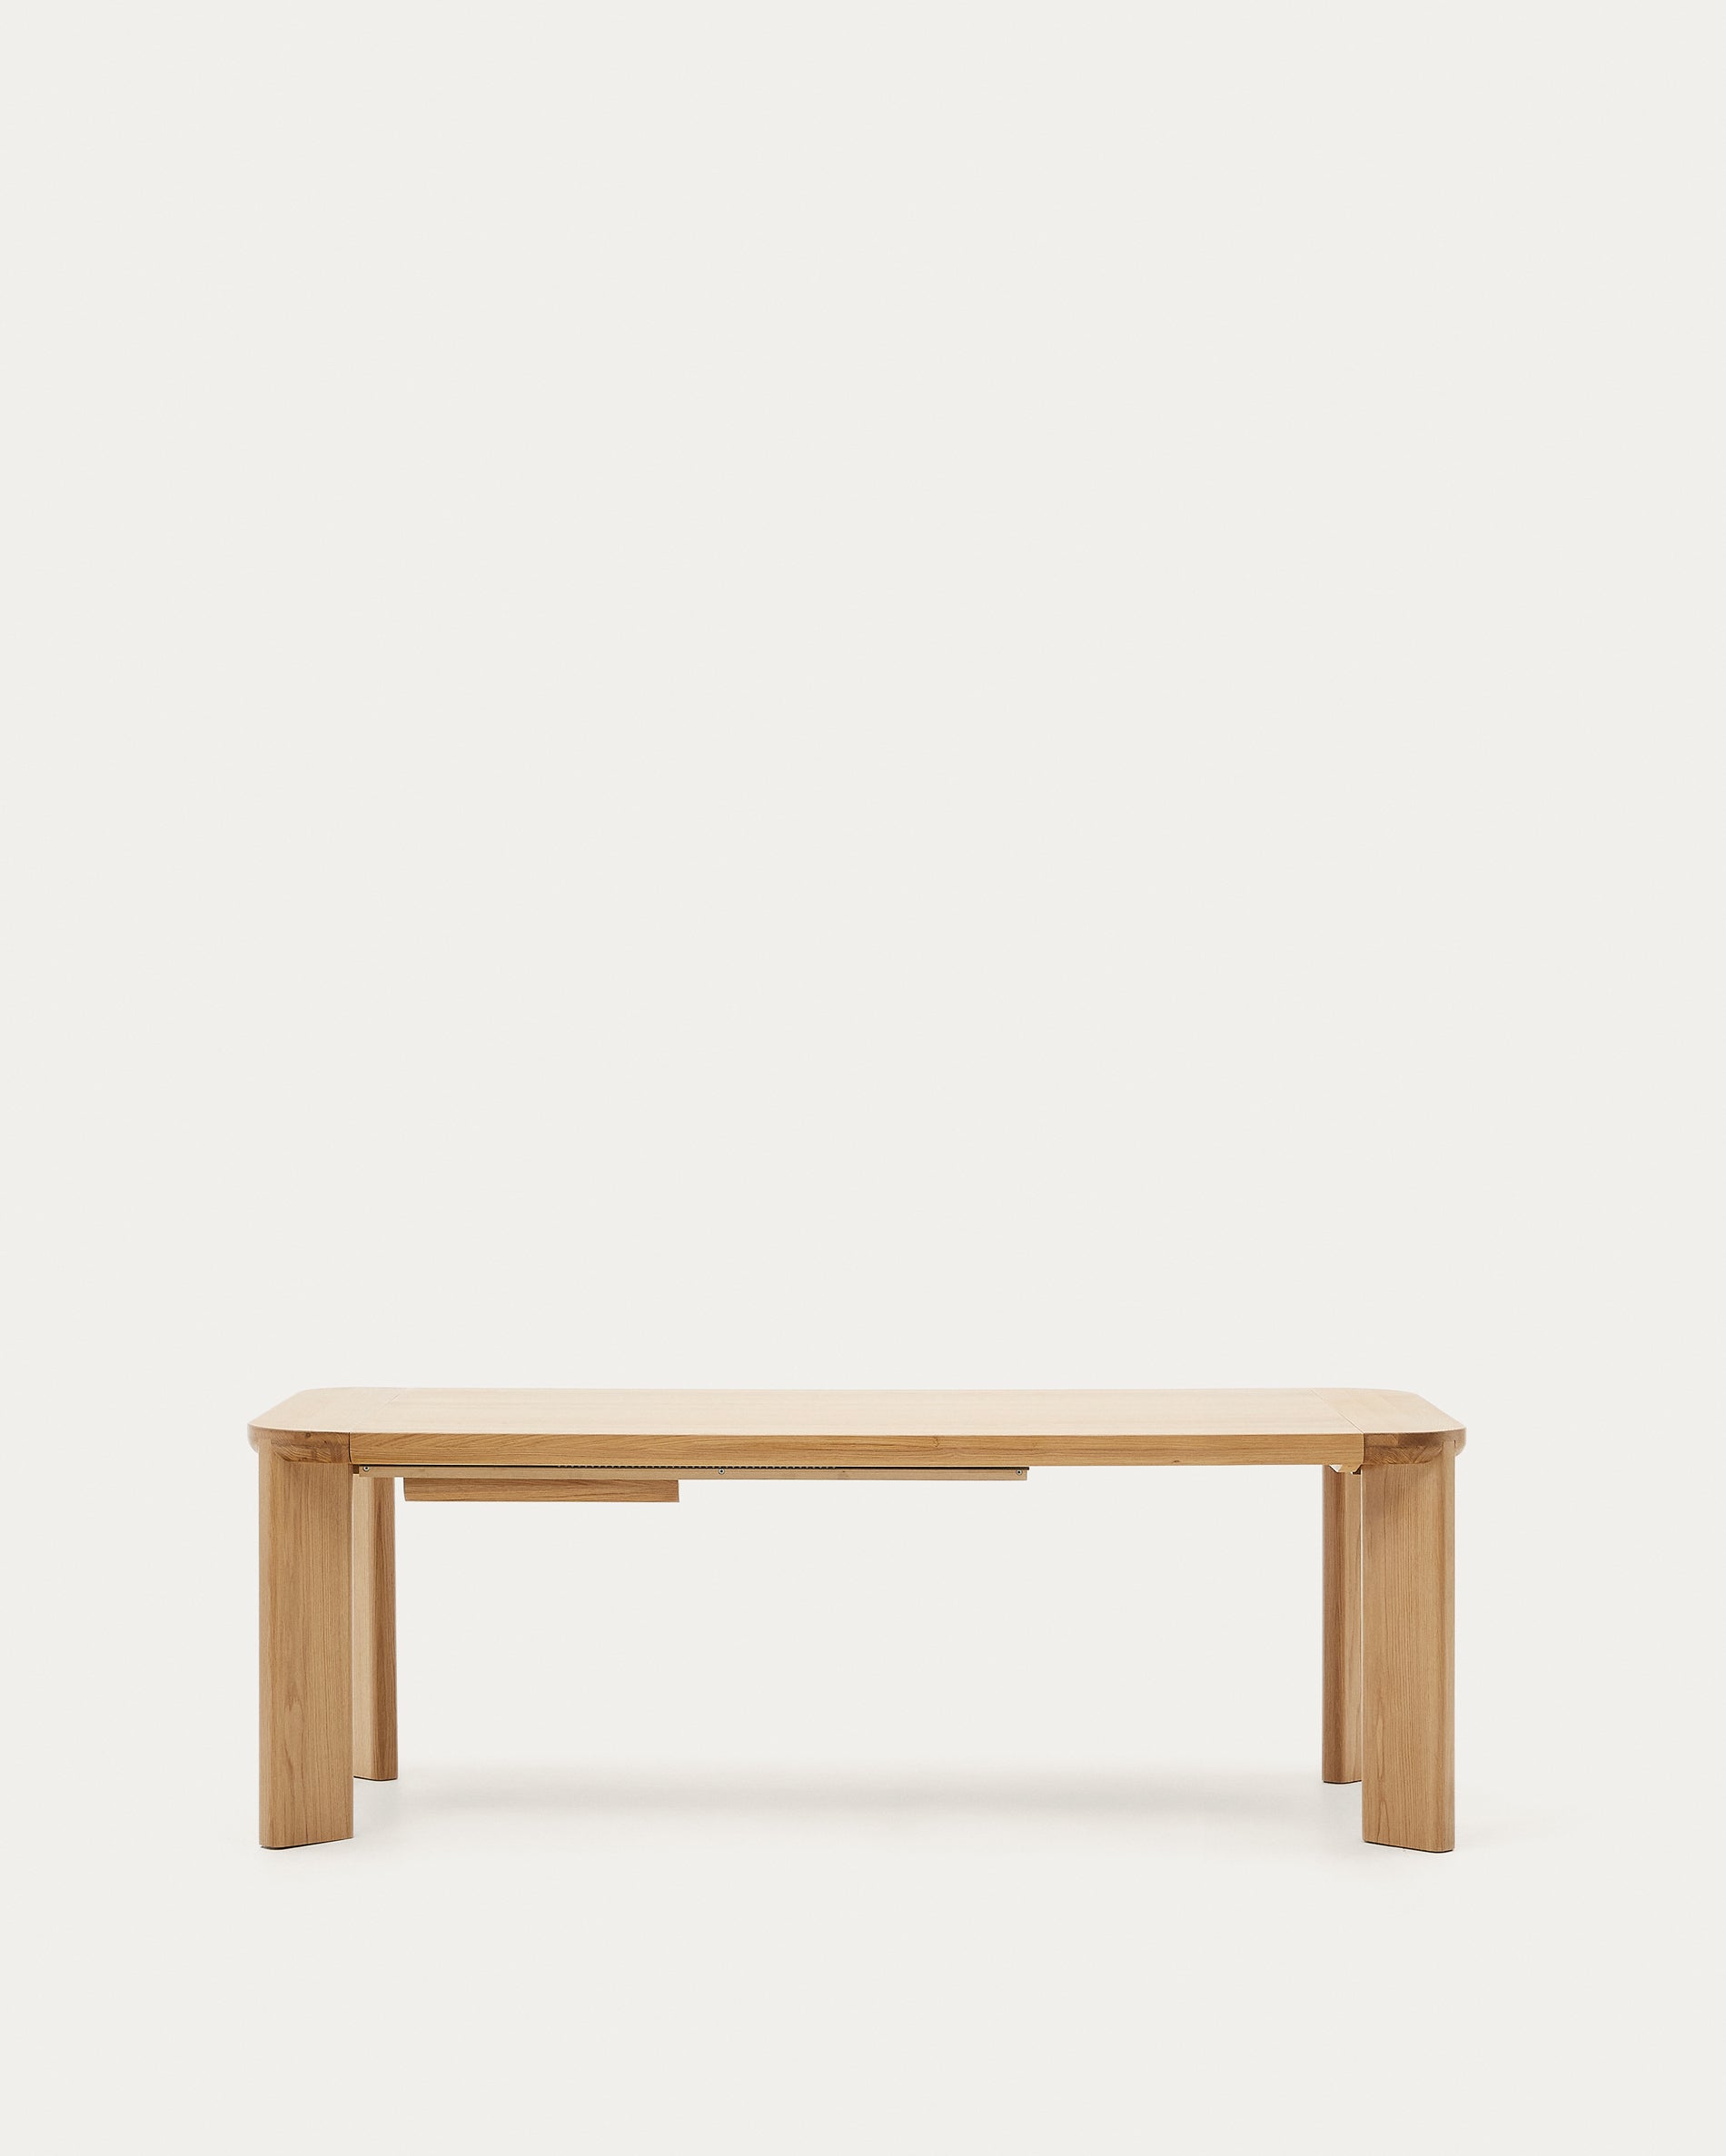 Jondal extendable table, made of solid wood and oak veneer, 100% FSC, 200 (280) cm x 100 cm